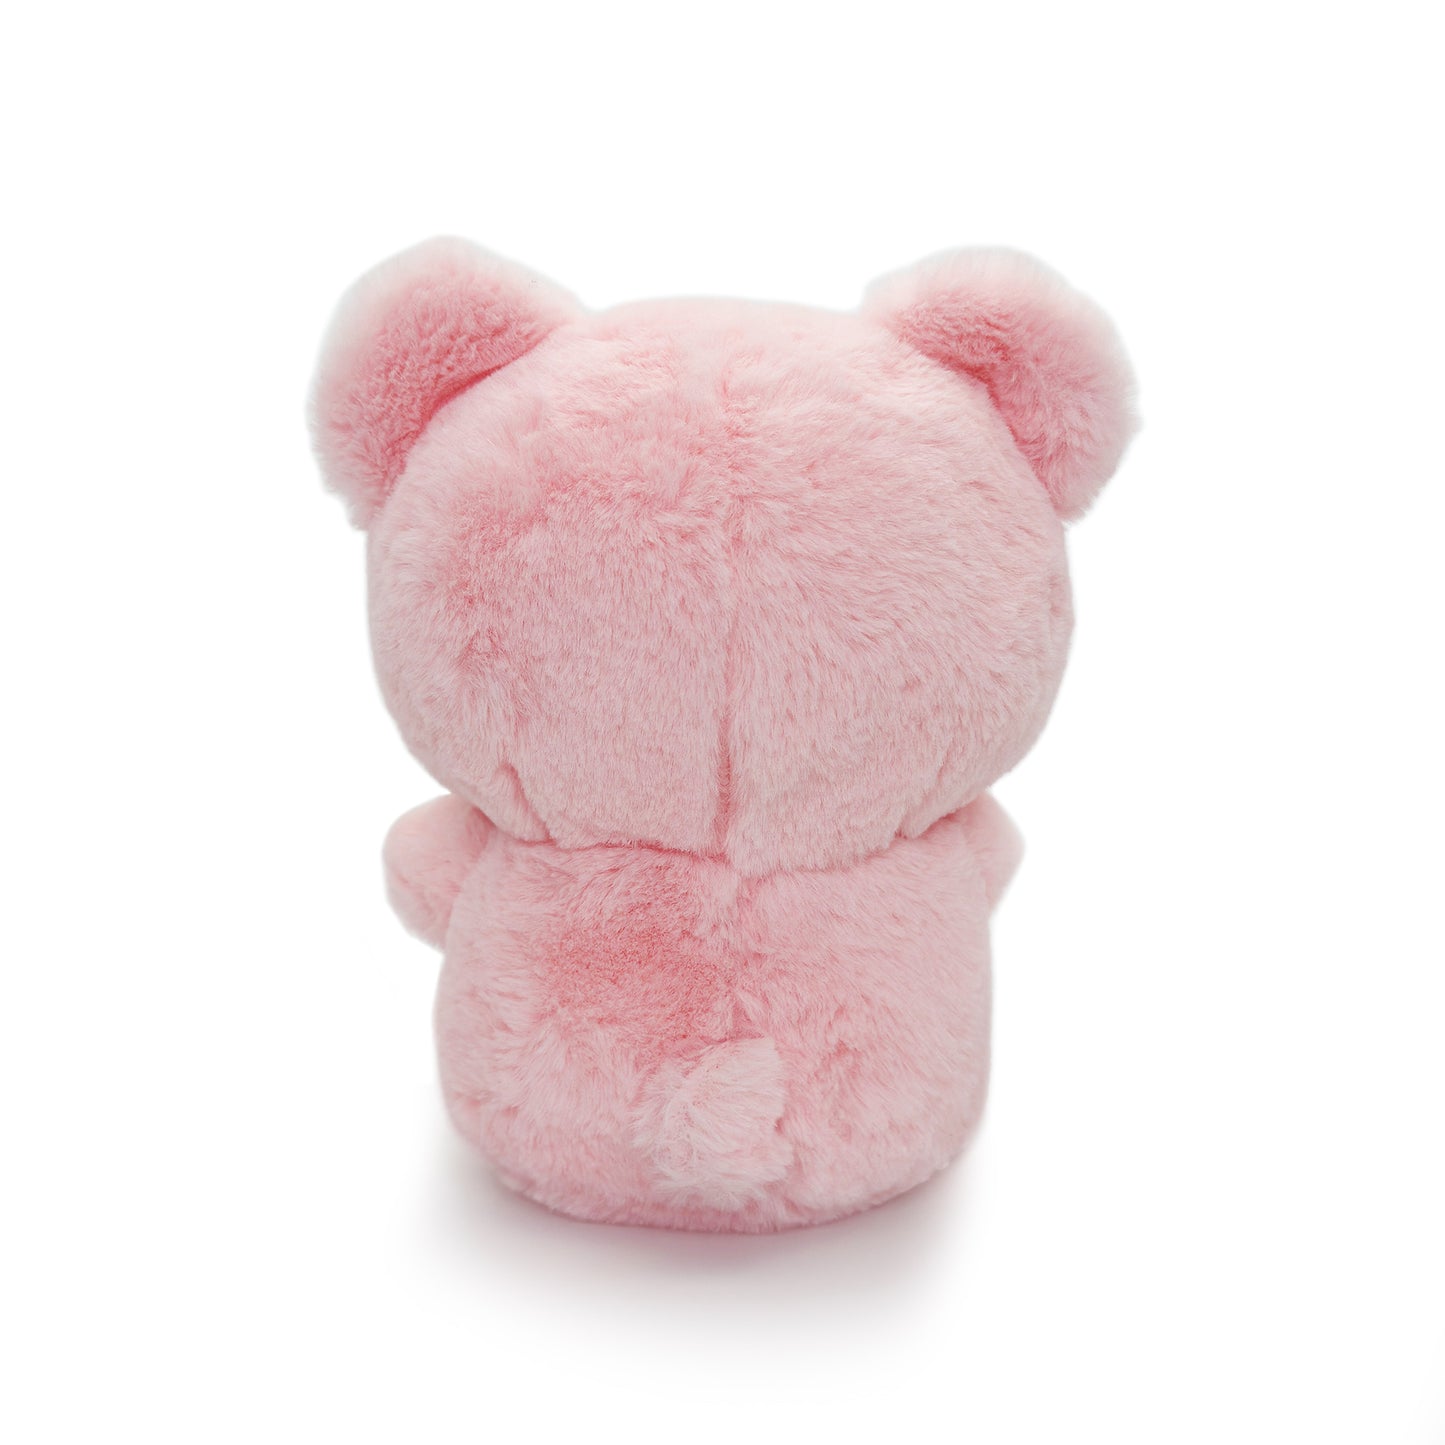 pink bear adorable doll toy plush PlushThis